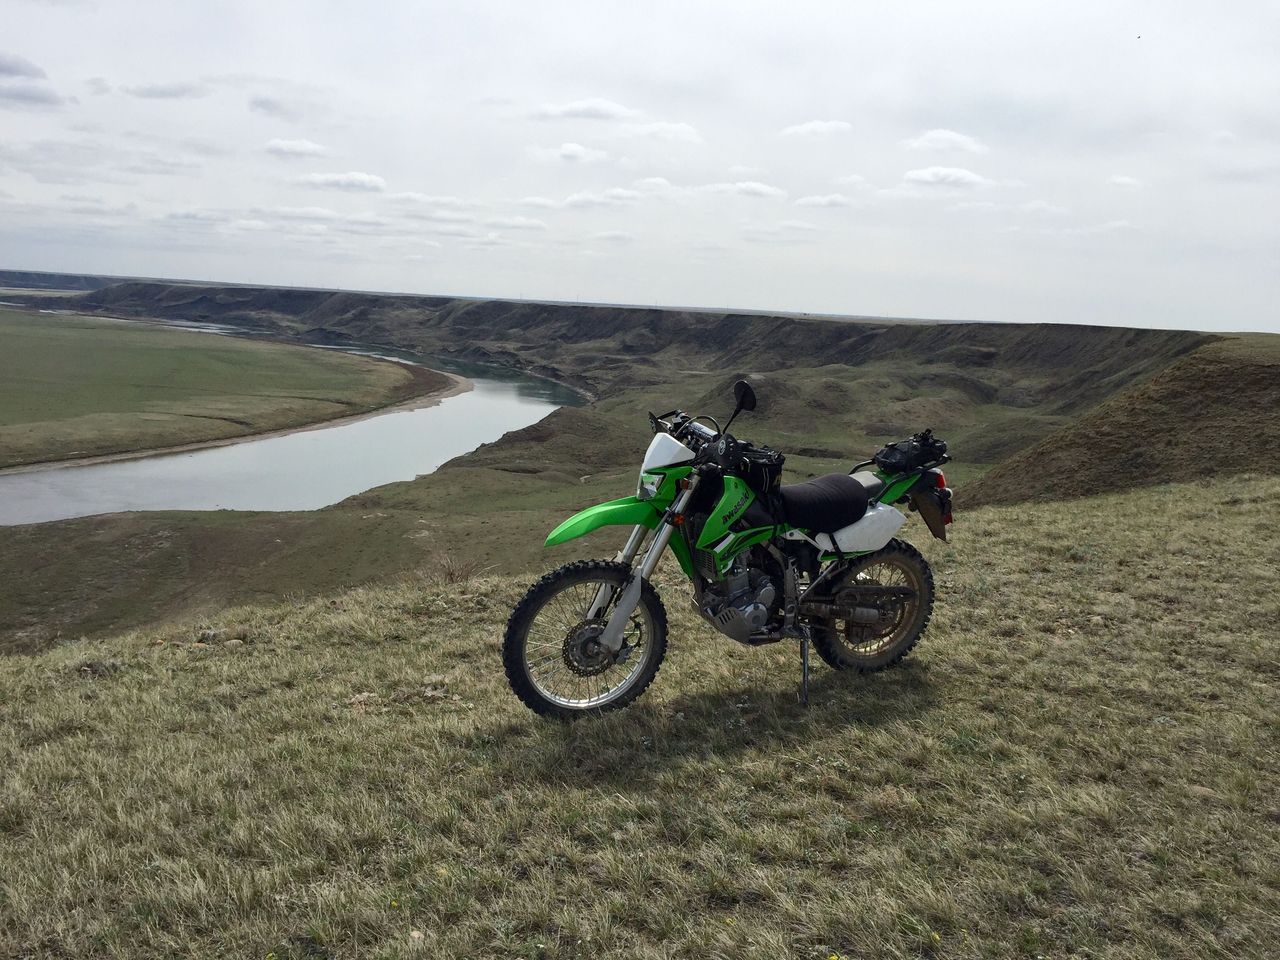 KLX250S - A great little bike that took me on many adventures